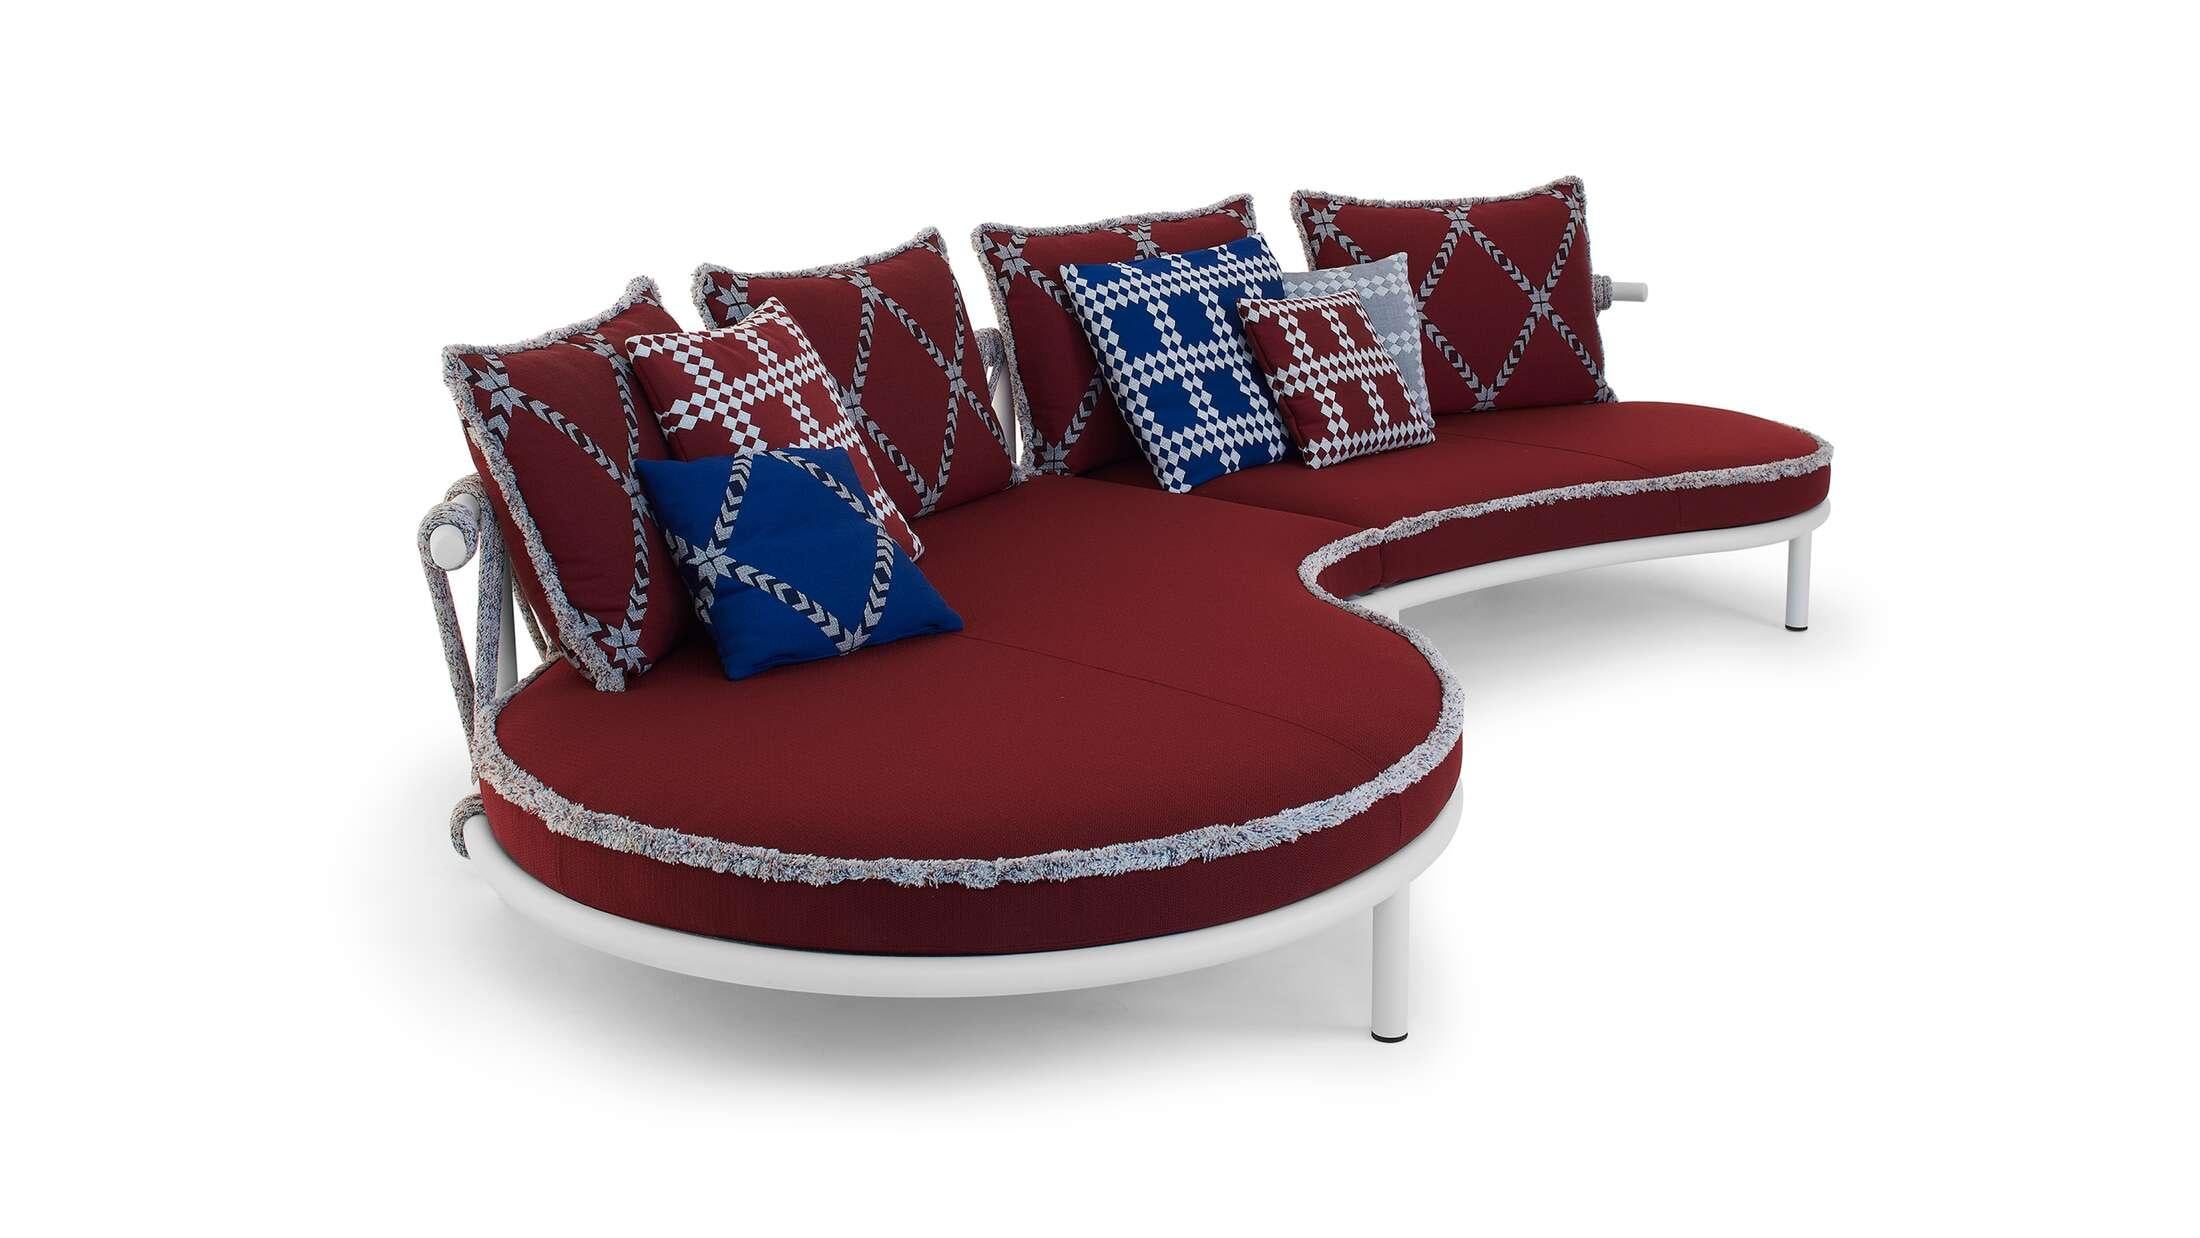 The price given applies to the piece as shown in the first picture. Prices vary dependent on the chosen size and color. 

Outdoor sofa designed by Patricia Urquiola in 2020. Patricia Urquiola interprets the happiness of life outdoors with a